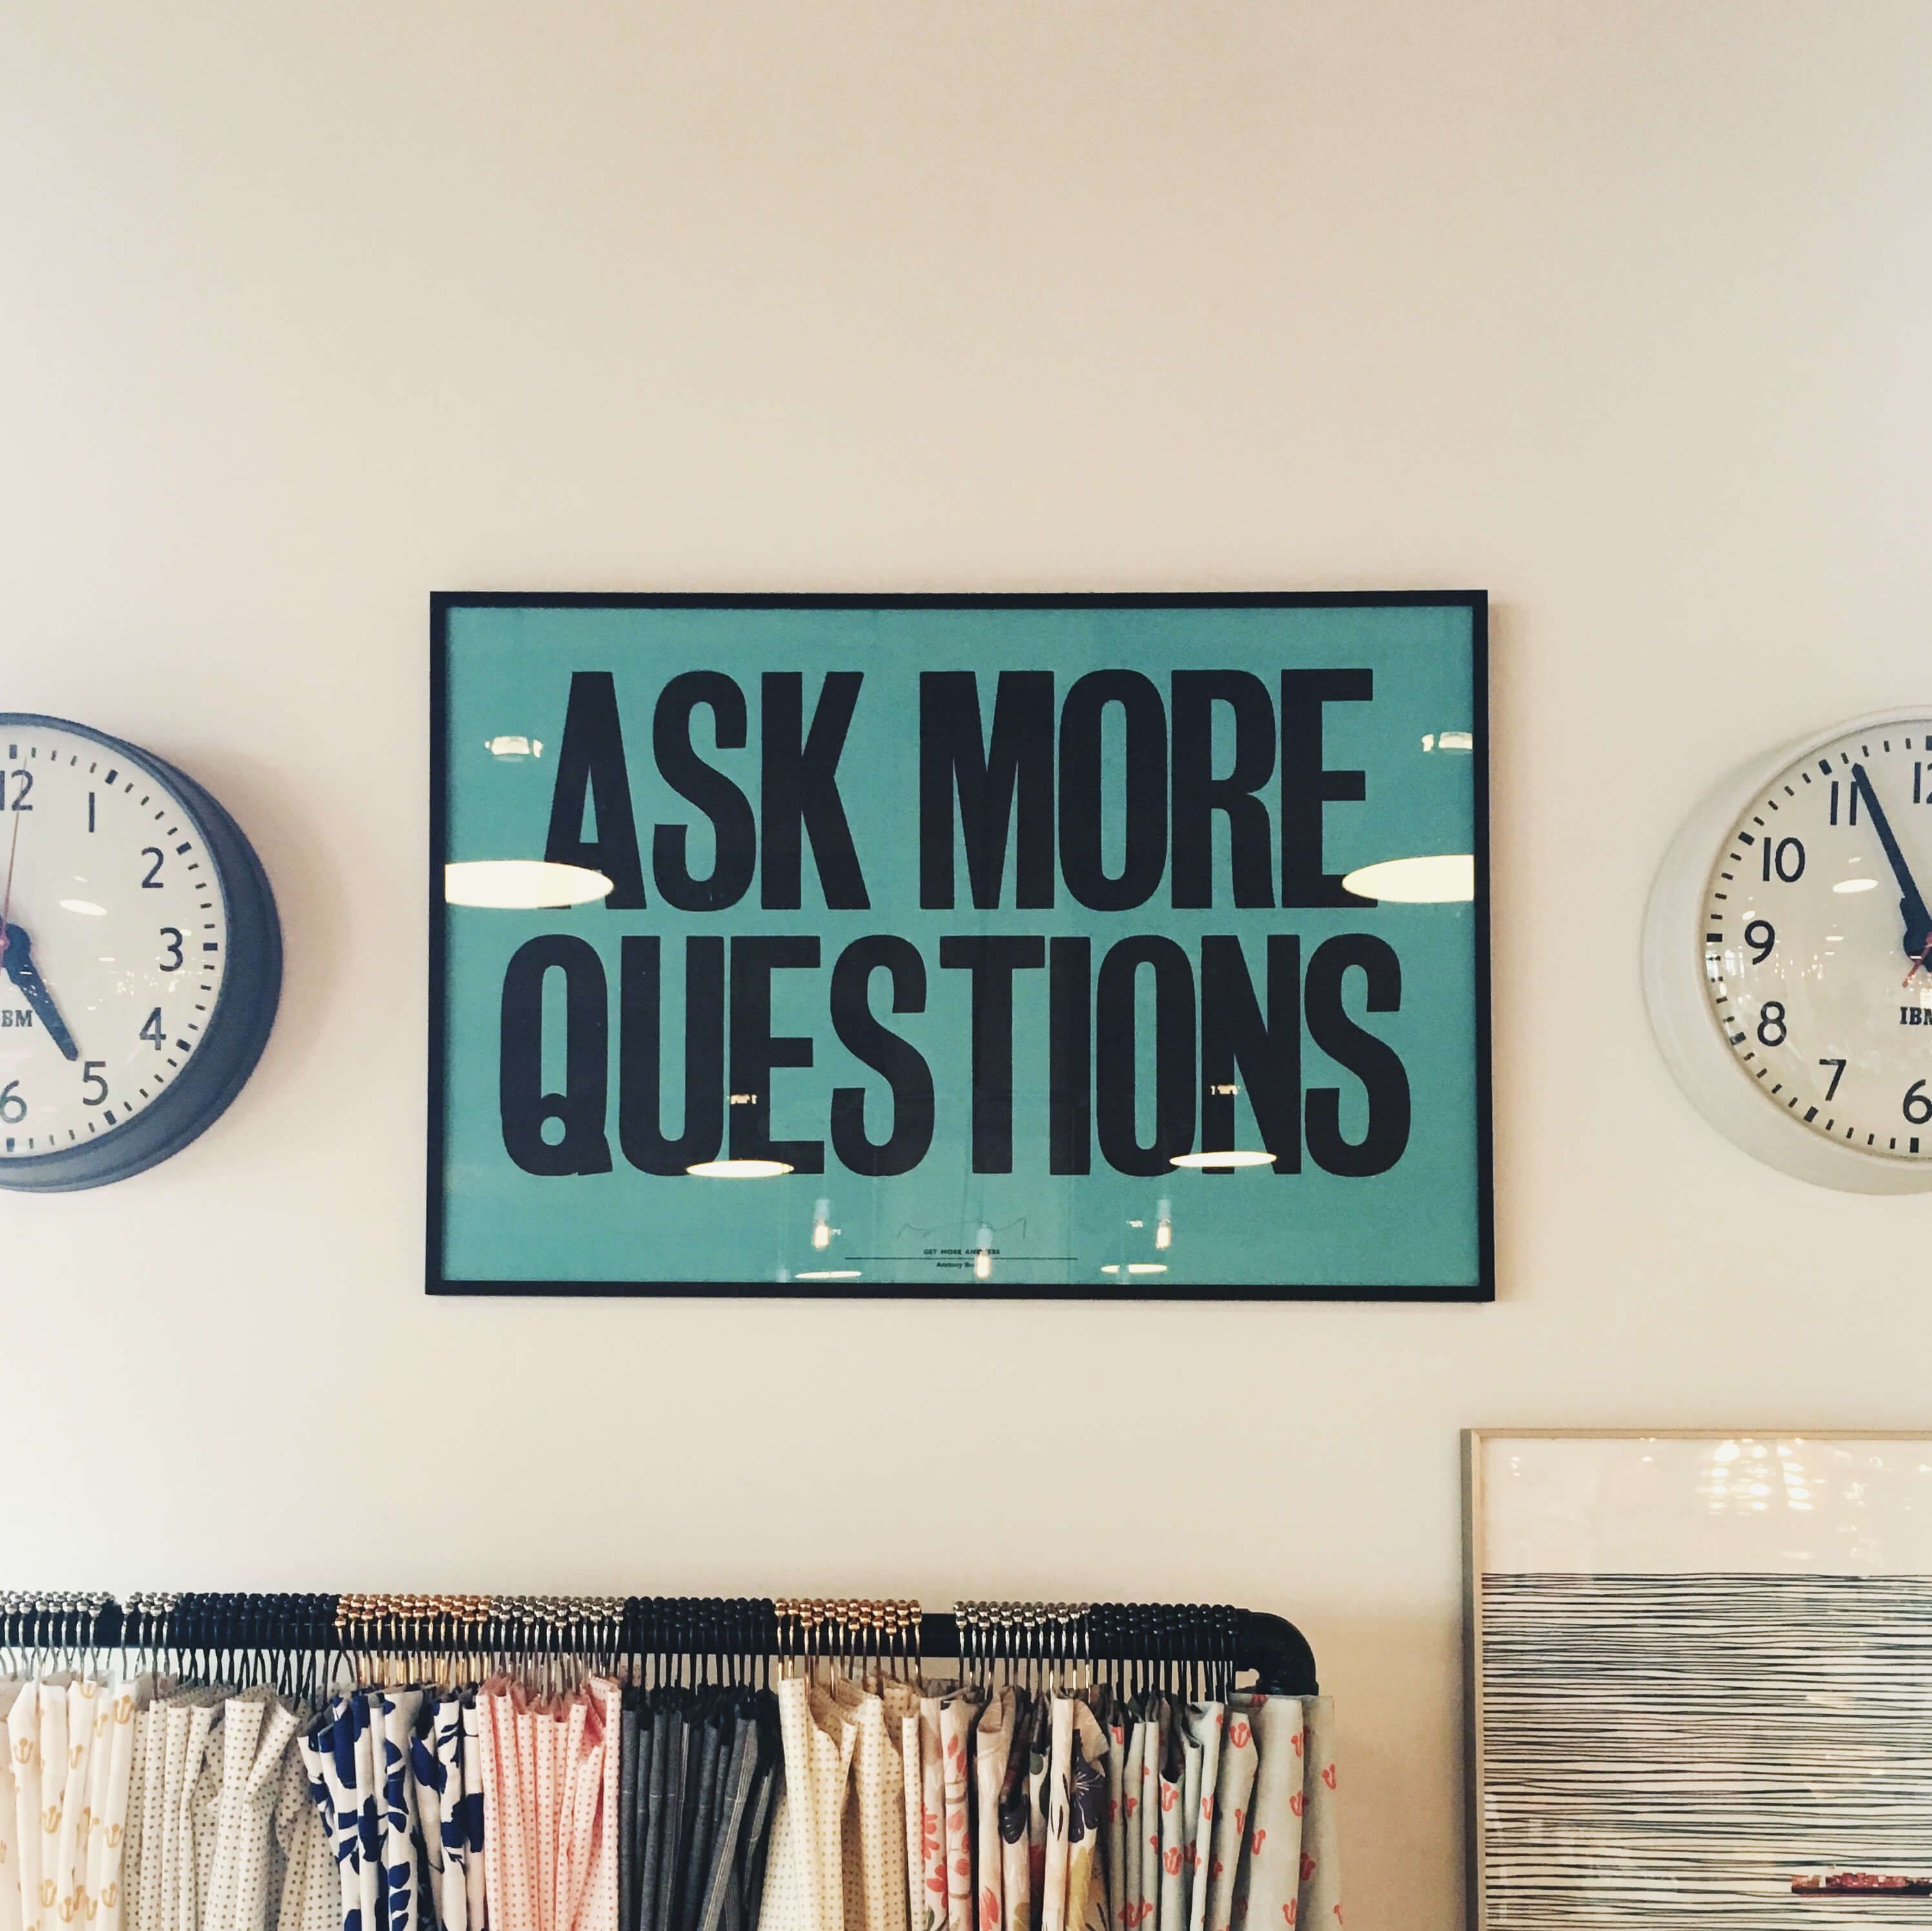 ask more questions poster on wall - Keys to build positive business relationships - Image